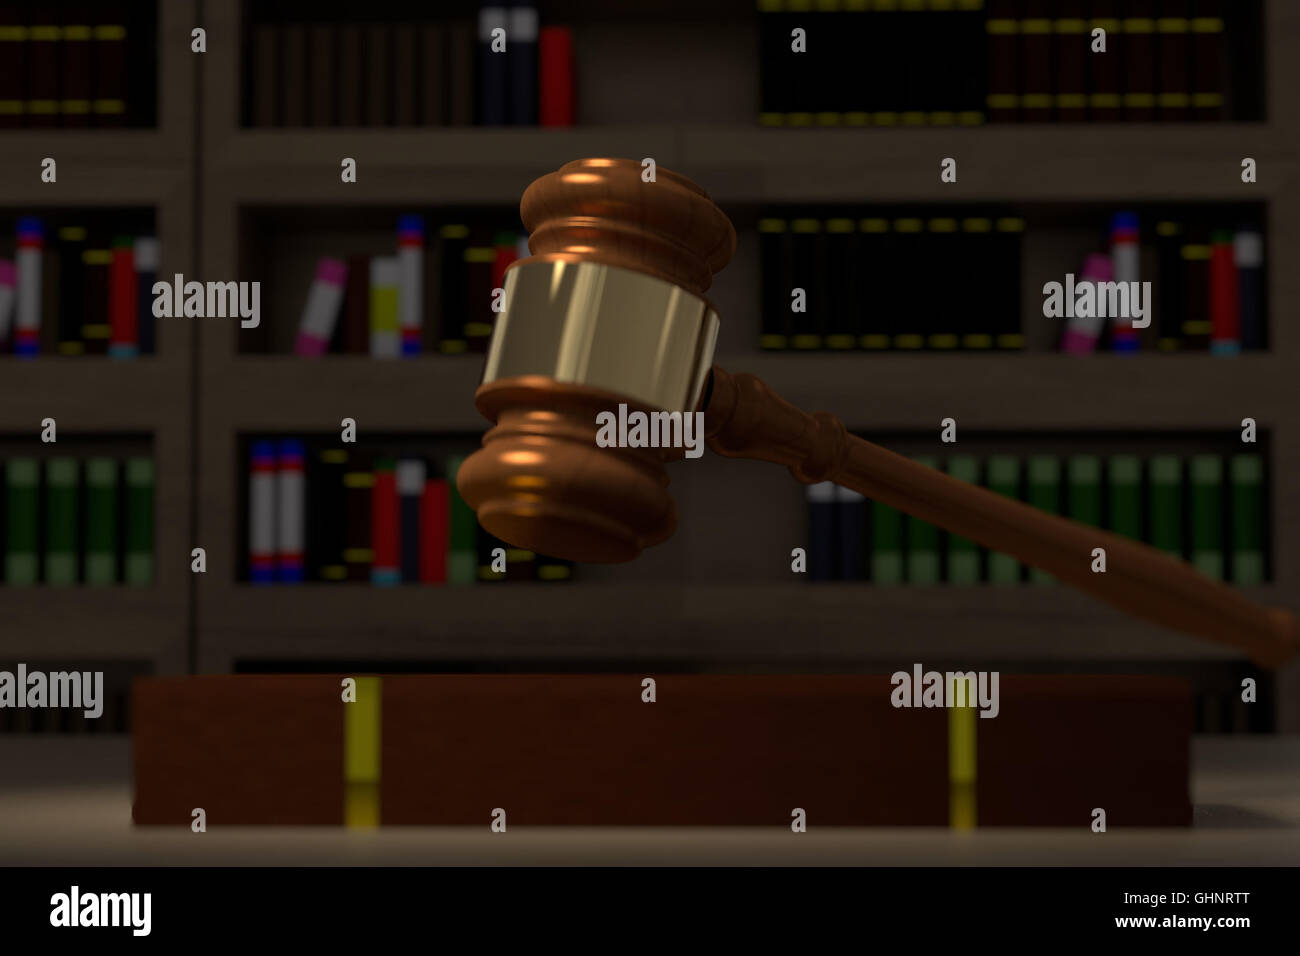 3D rendering of a judge hammer and books on a table Stock Photo